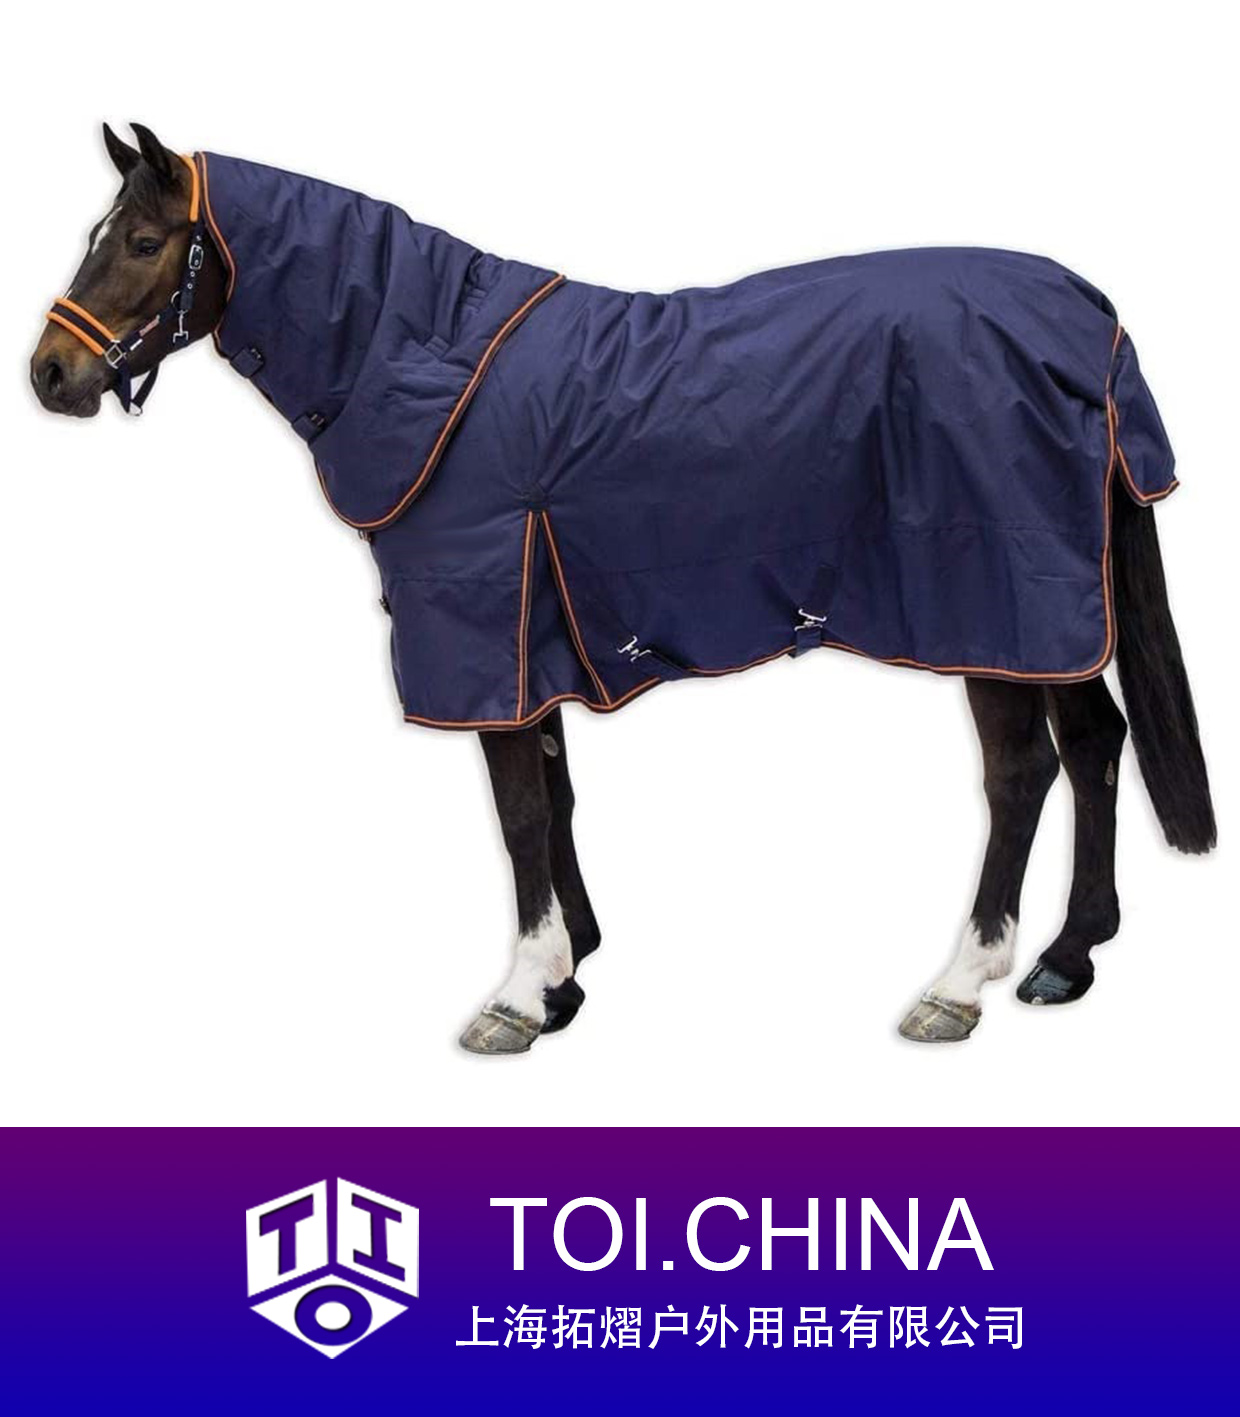 Horse Turnout Blanket, Winter Windproof Rainproof Snowproof Ripstop Horse Care Rug Horse Clothing